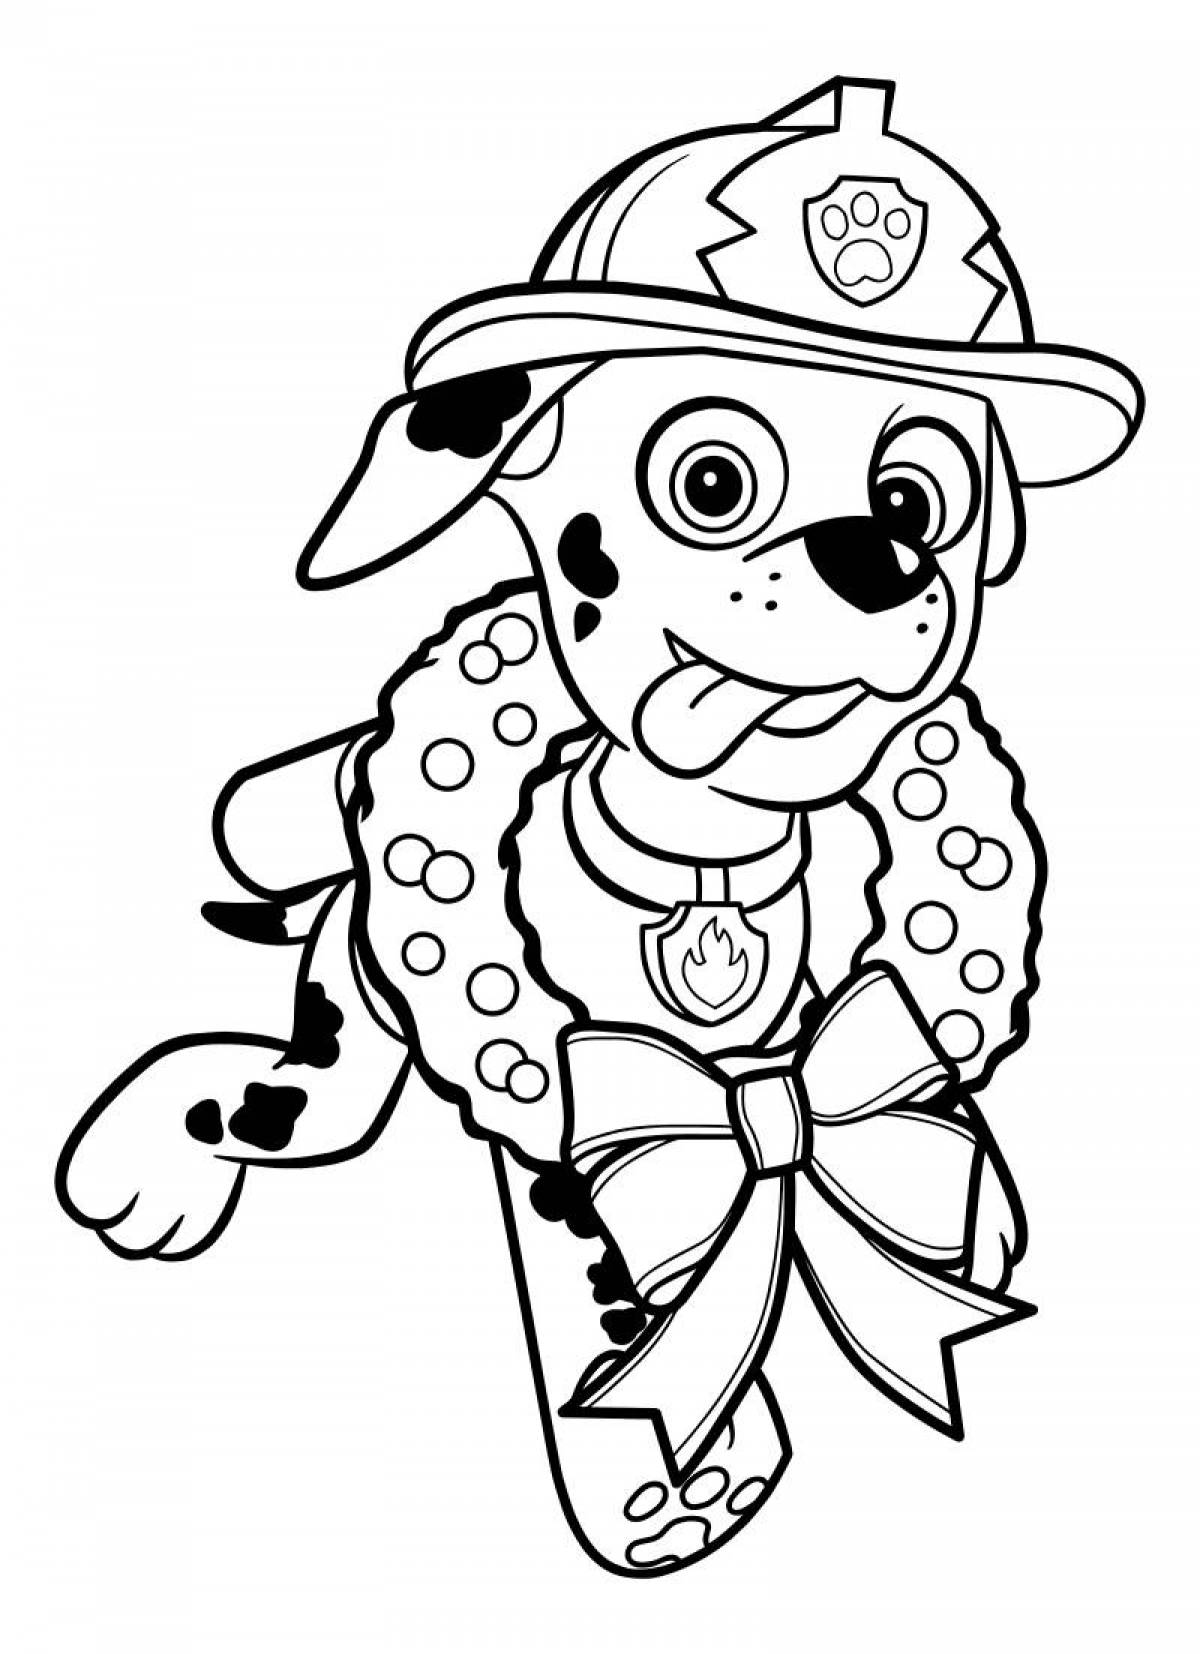 Animated Paw Patrol Marshal Coloring Page